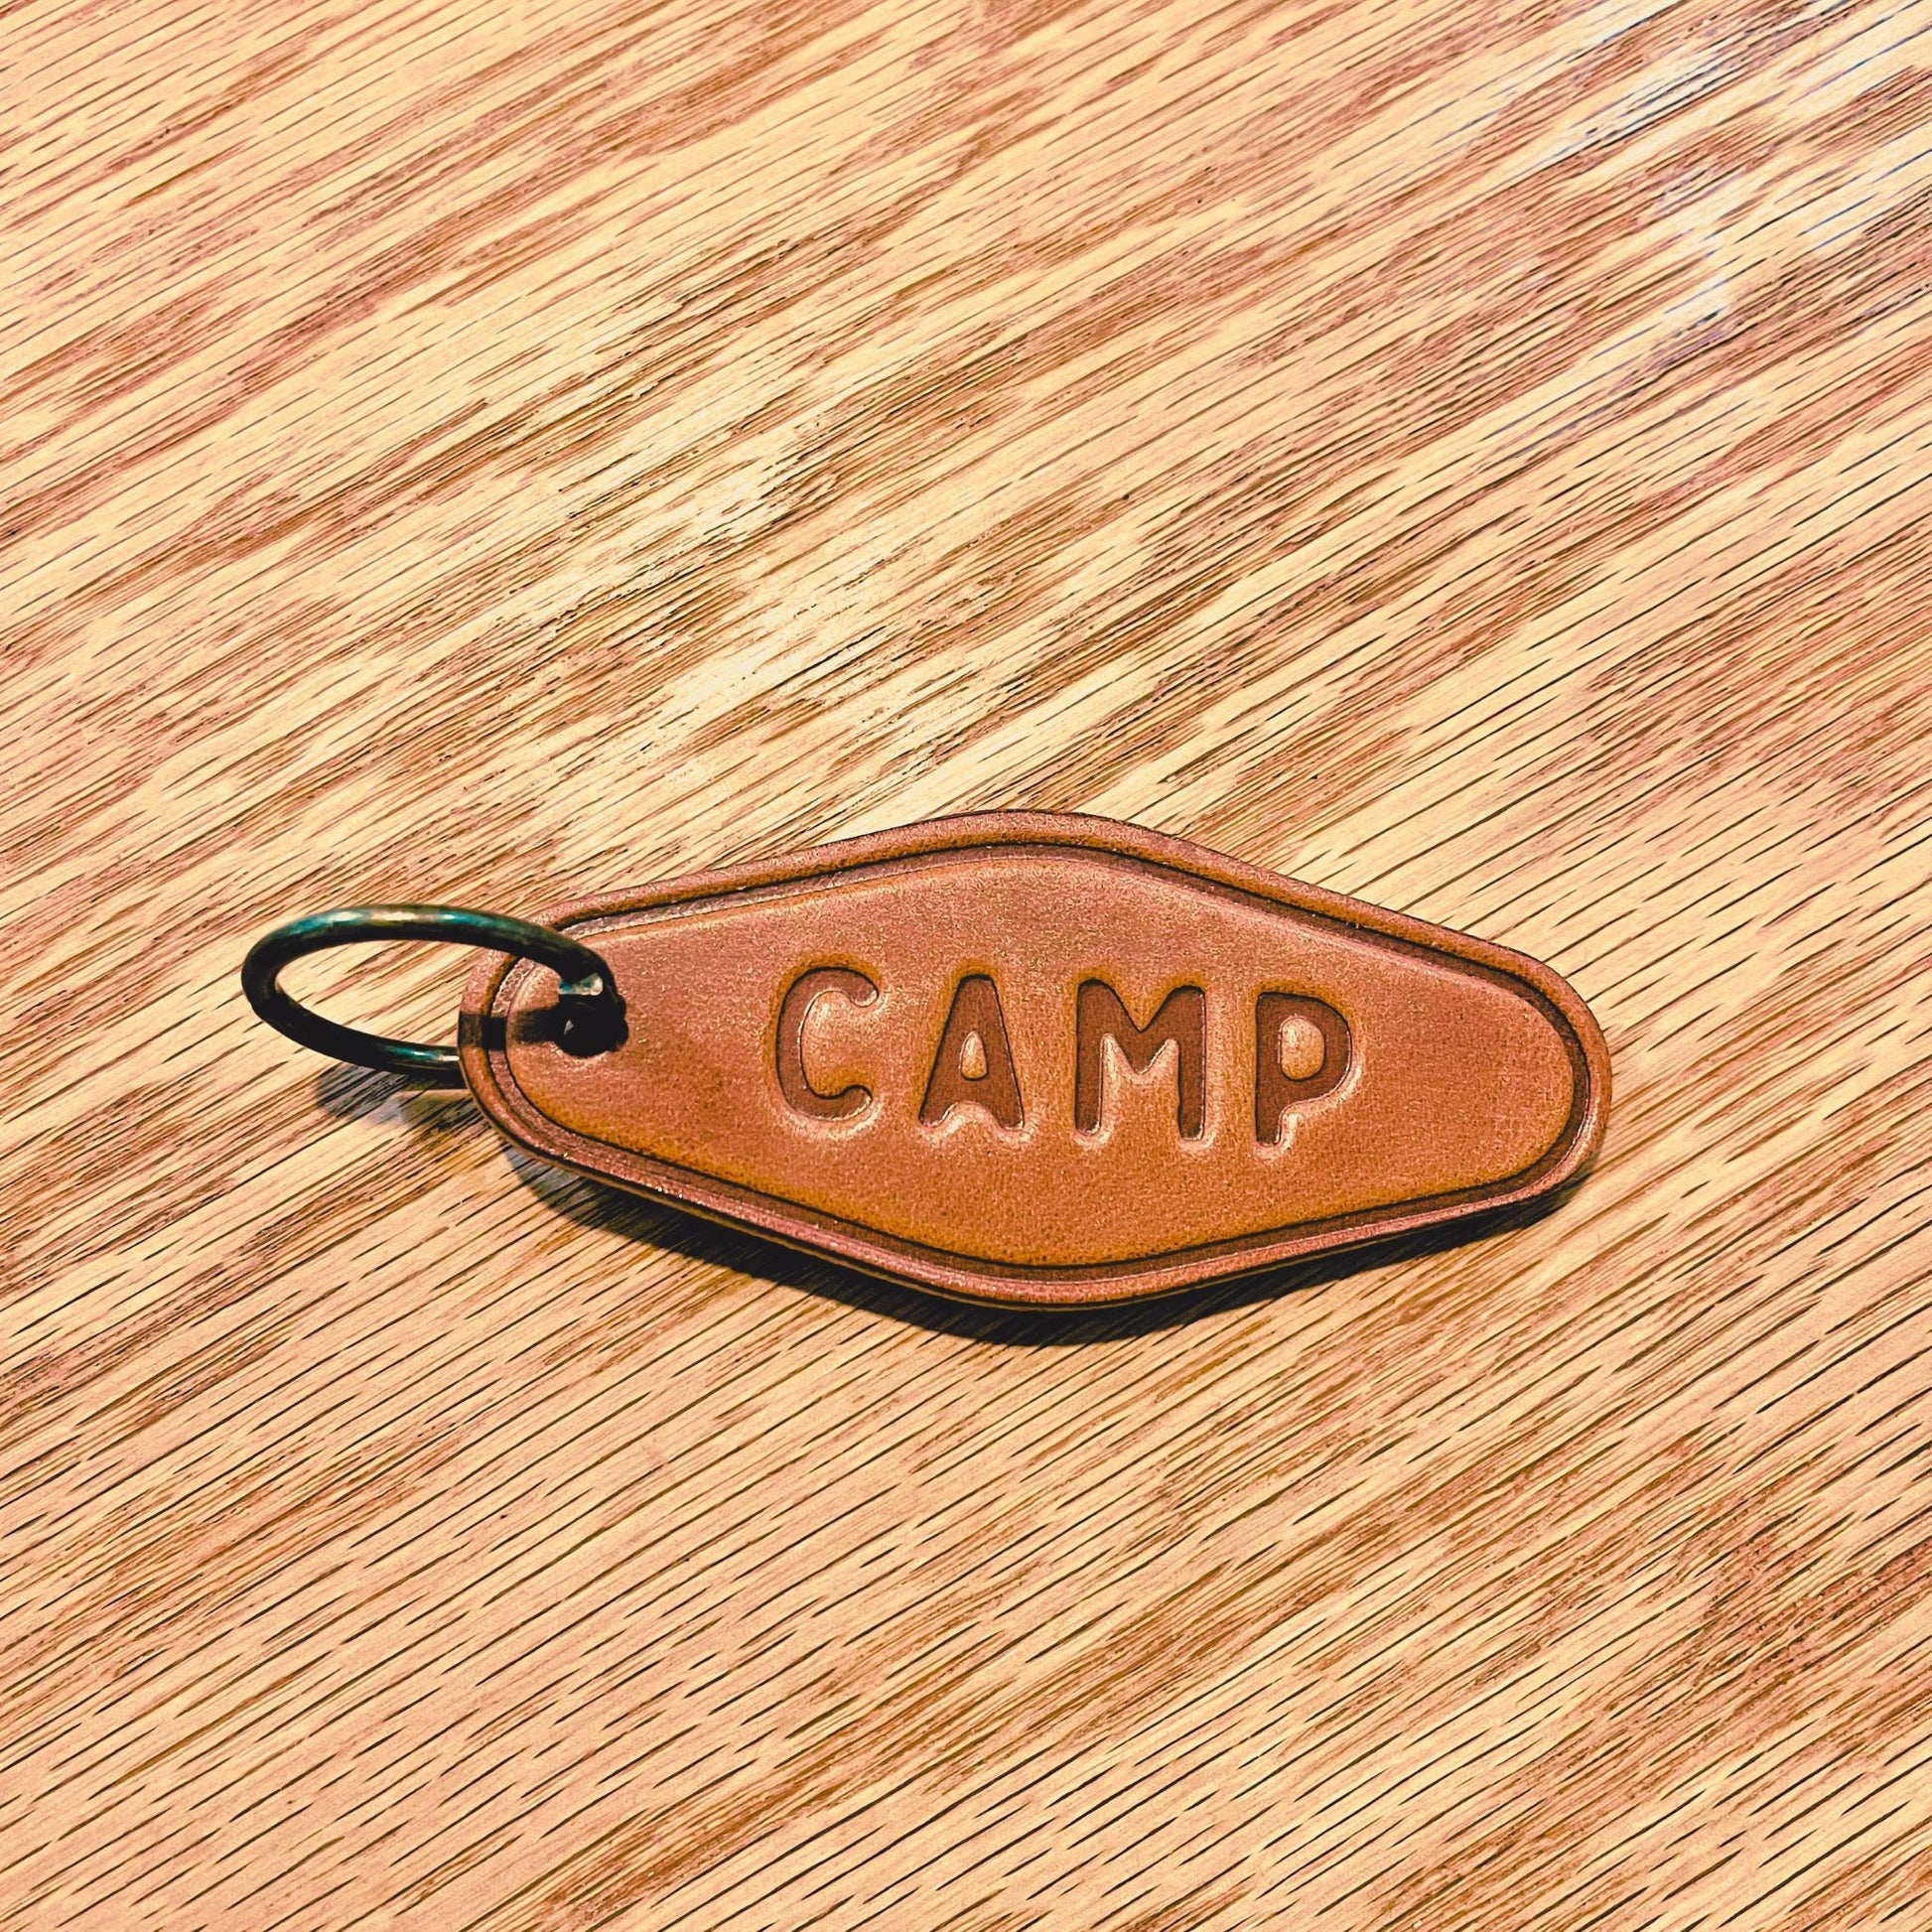 camp leather keychain cut and pressed by hand from some of the thickest and finest harness leather available.